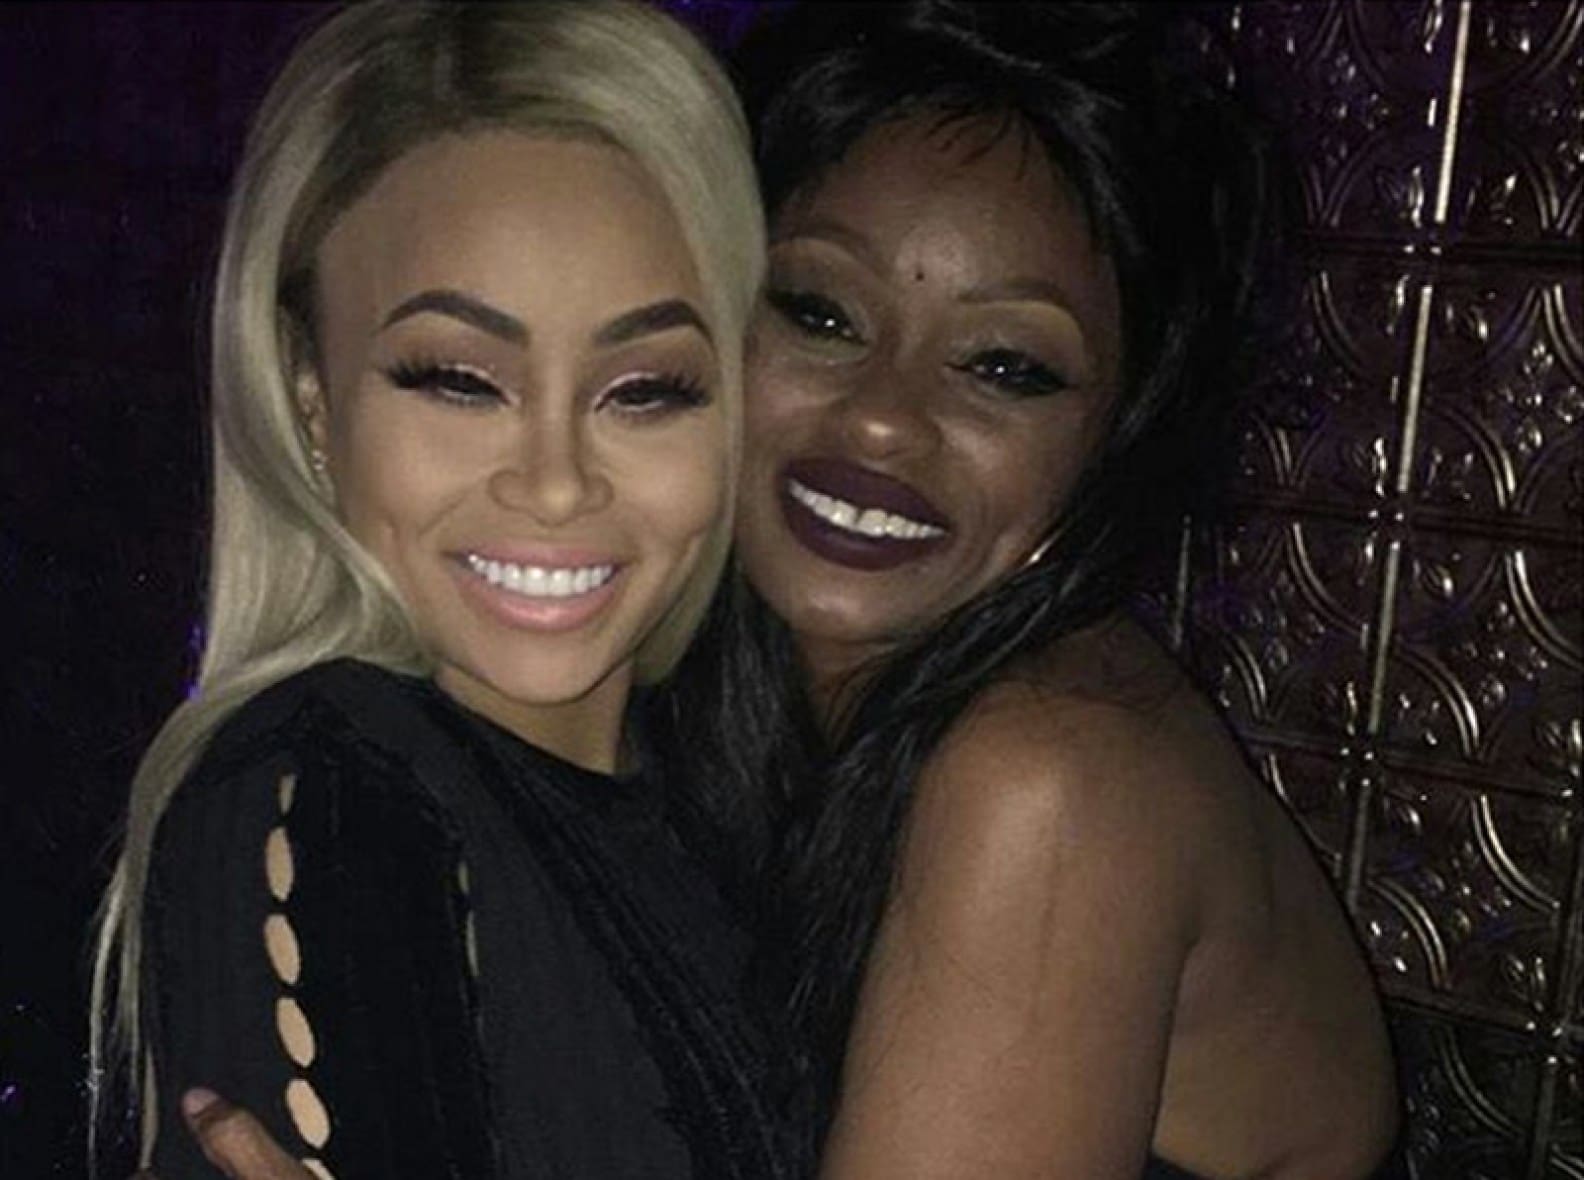 Blac Chyna And Her Mom, Tokyo Toni Embark A New Journey To Repair Their Relationship - They Publicly Profess Their Love For One Another